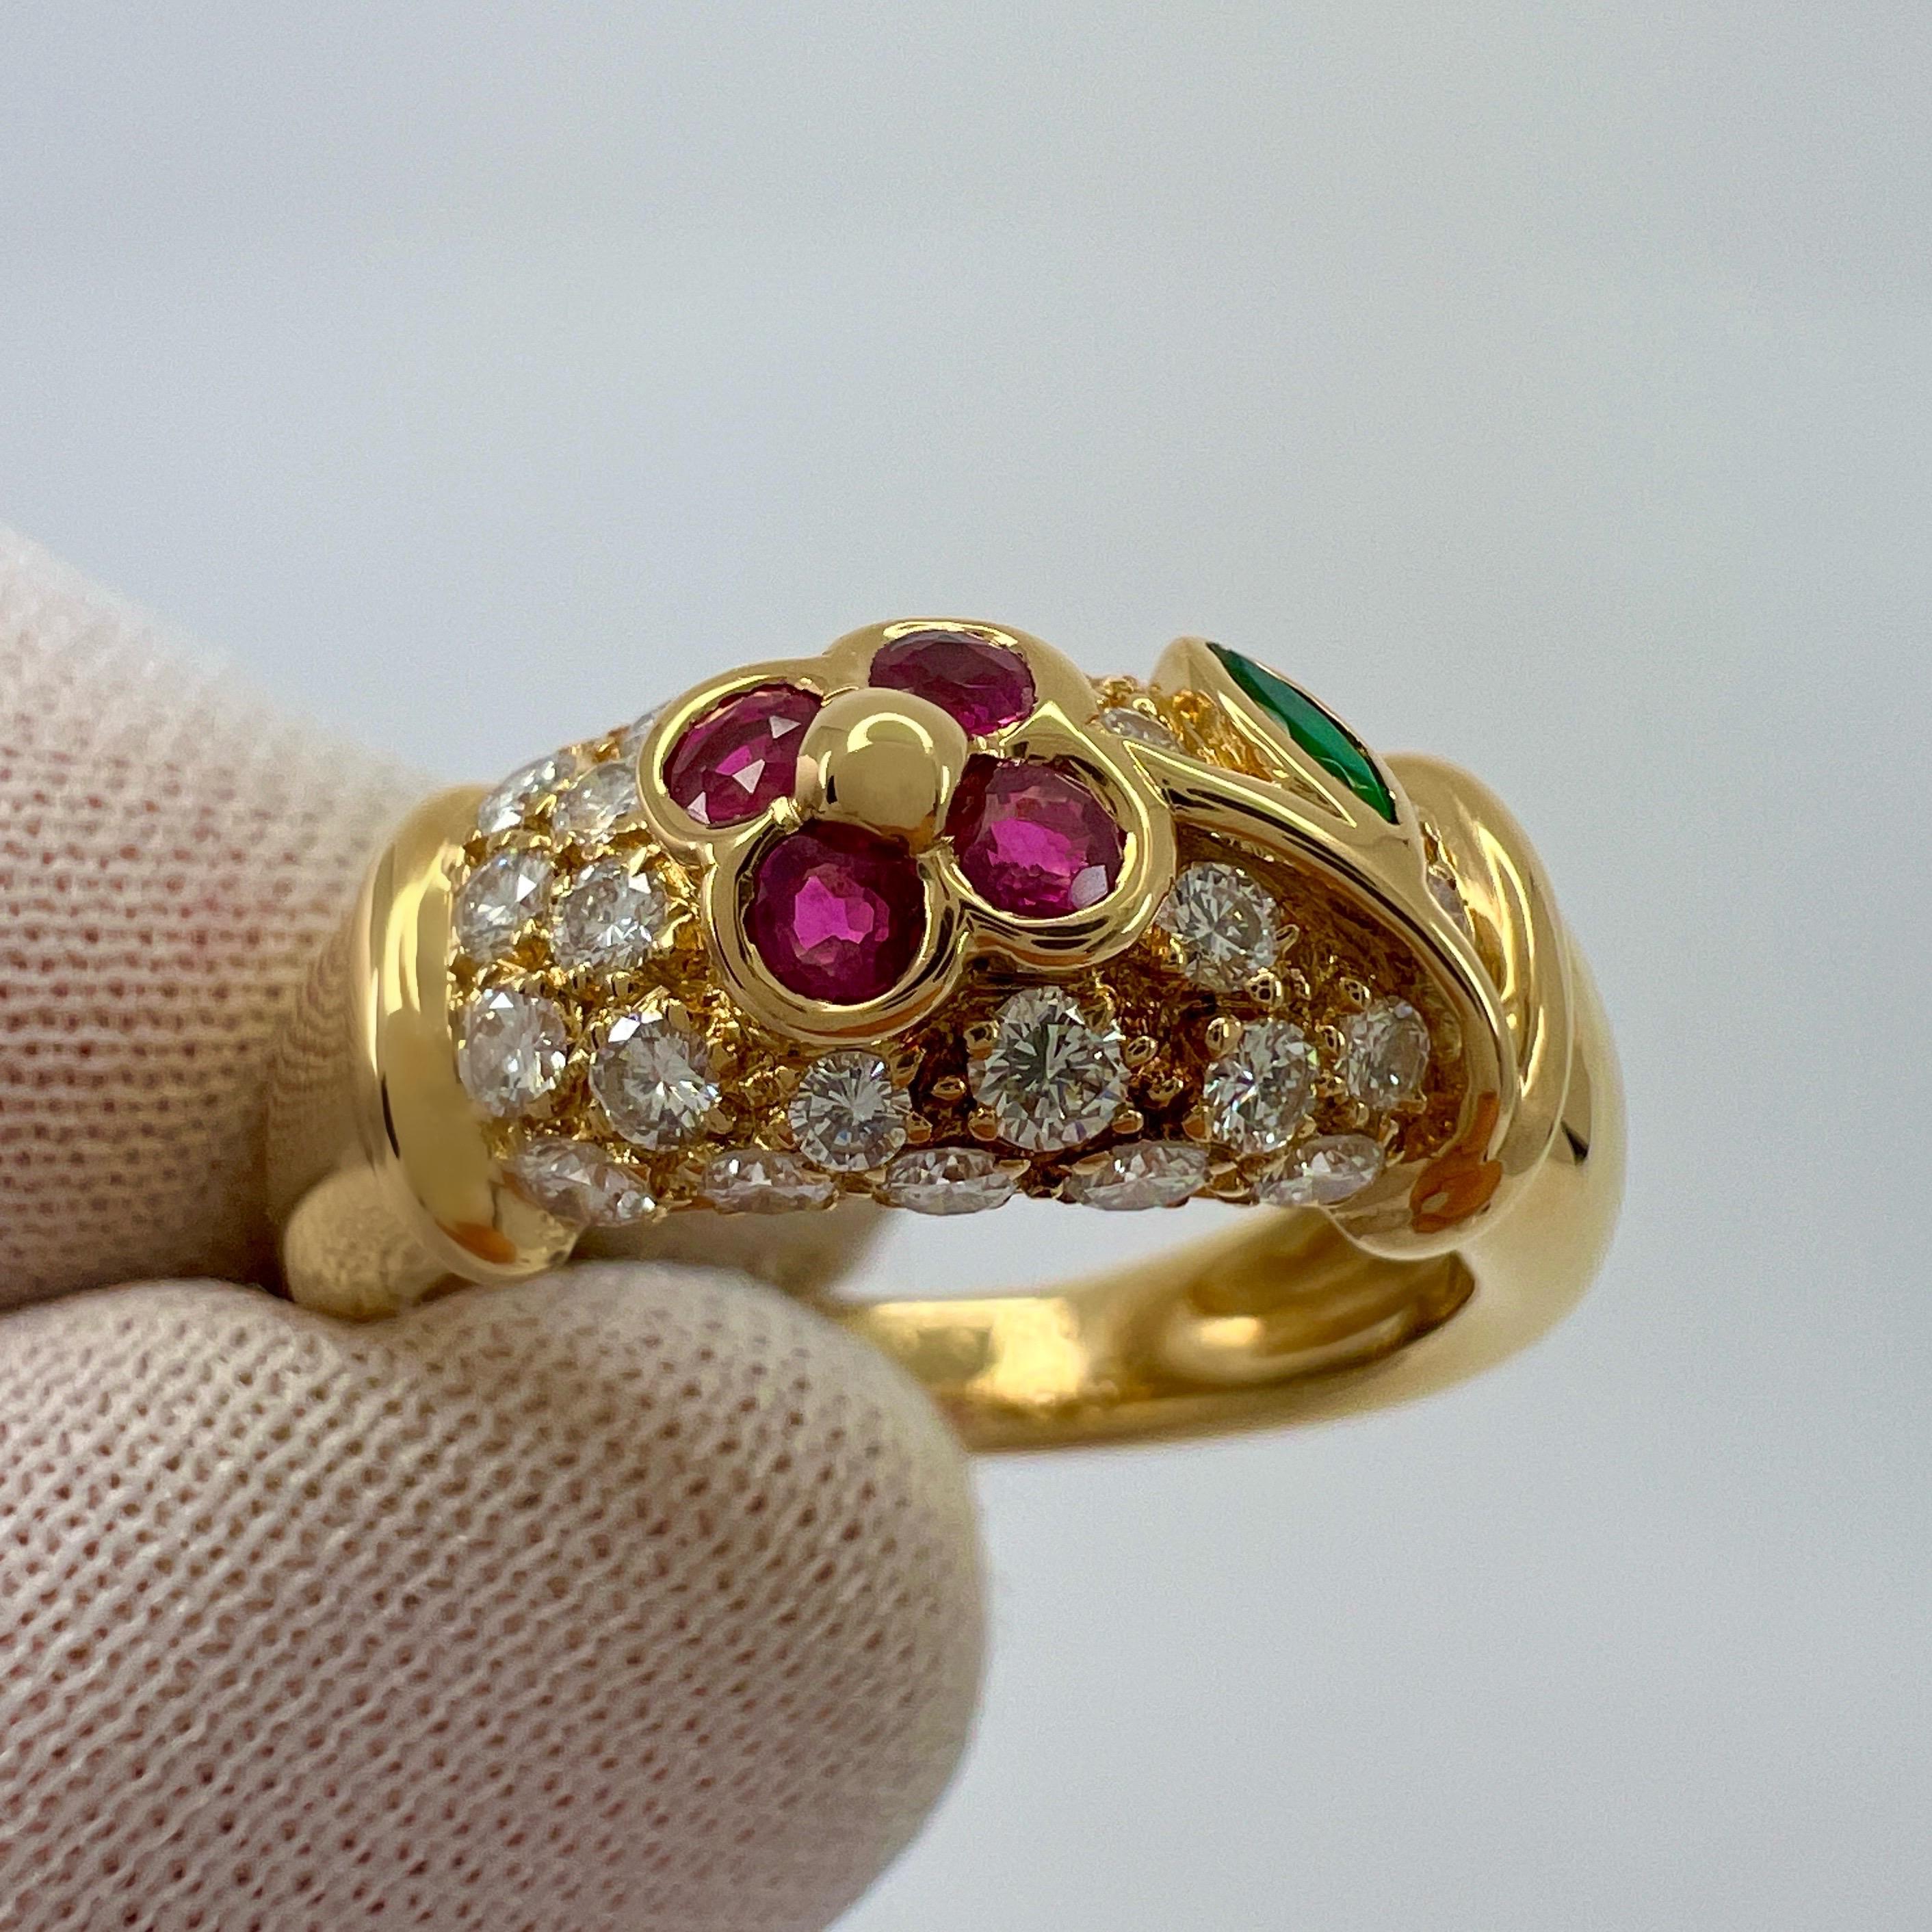 Round Cut Rare Van Cleef & Arpels Ruby Emerald Diamond 18k Yellow Gold Floral Flower Ring For Sale